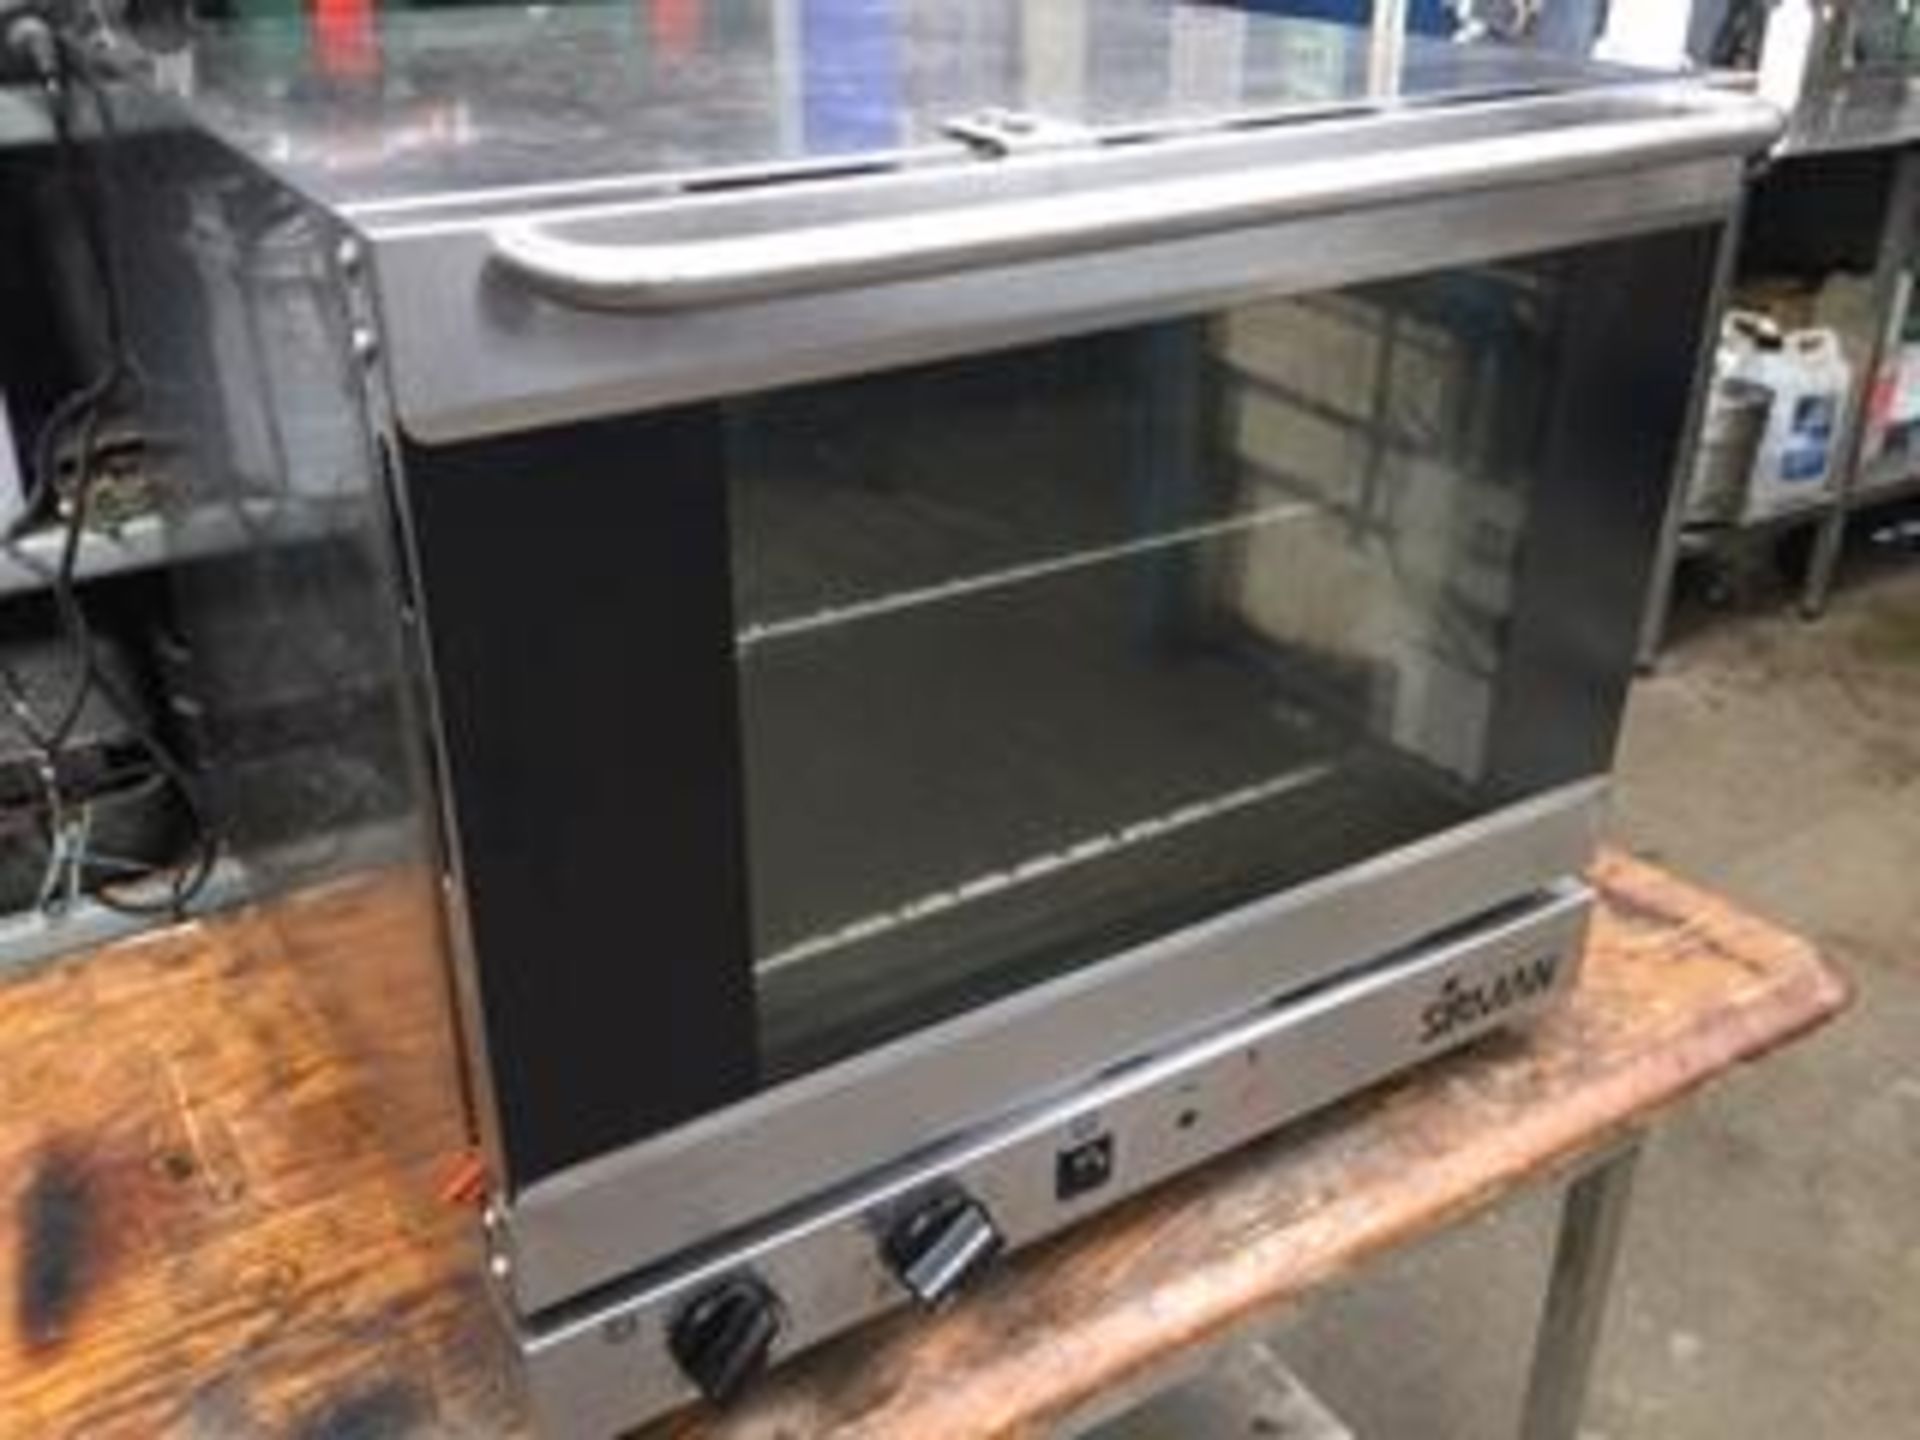 Sirman Electric Convection Oven – Tested Working – NO VAT - Image 2 of 2